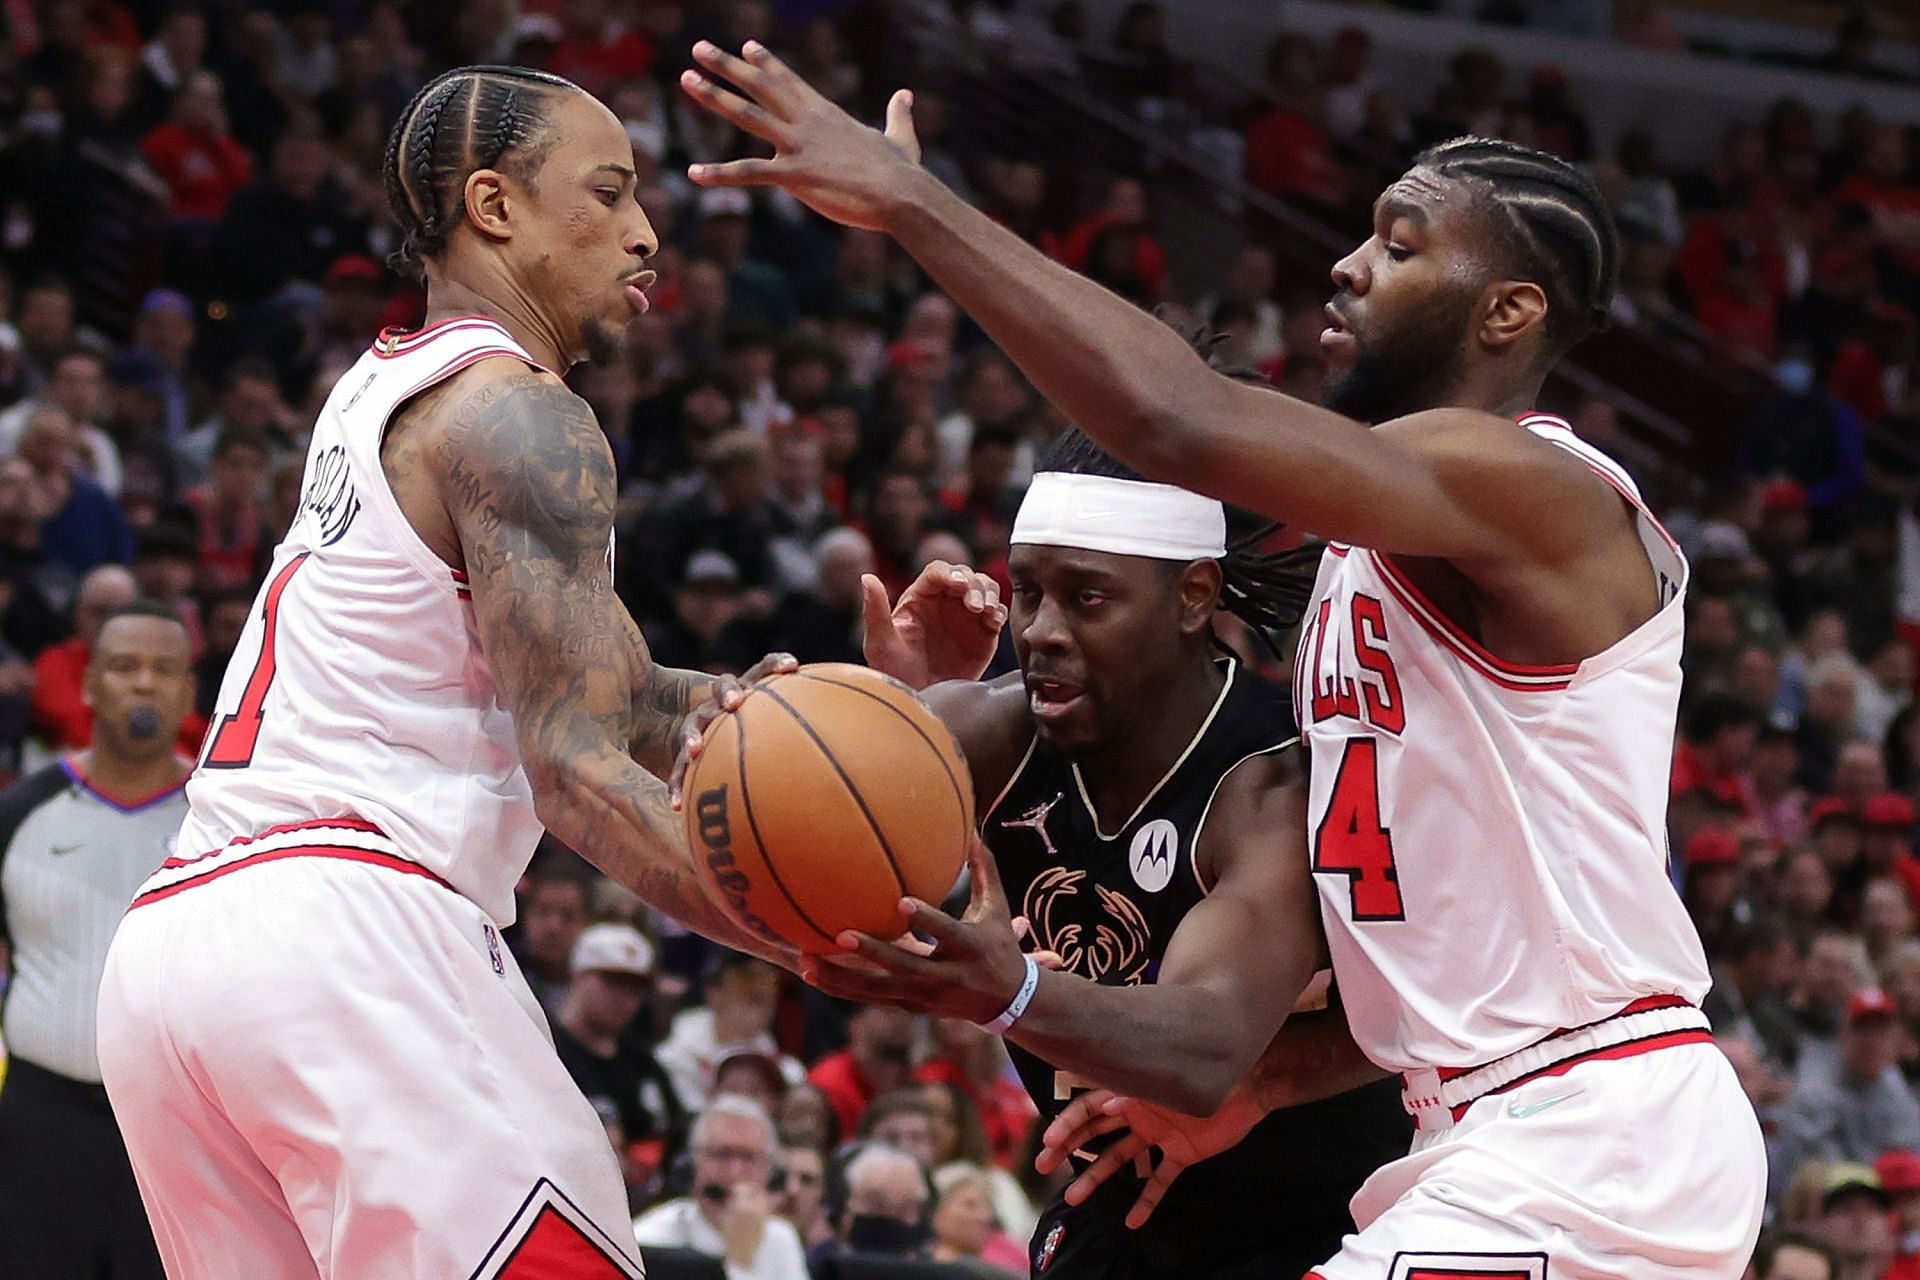 The Milwaukee Bucks will take on the Chicago Bulls at home for Game 5 on Wednesday night.